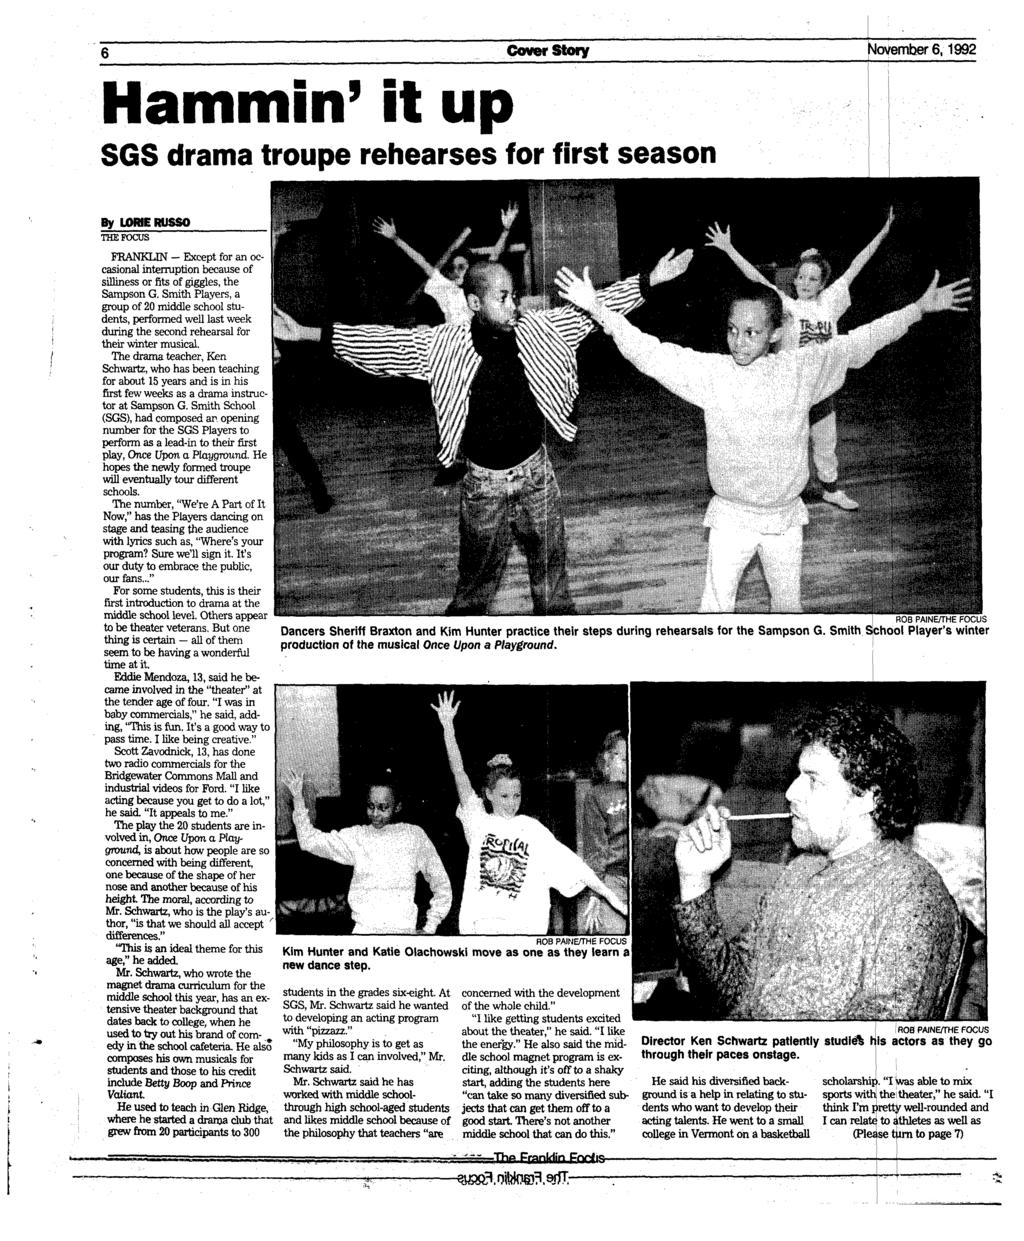 Hammin' it up SGS drama troupe rehearses for first season Cover Story November 6,1992 By LOMERUSSO THE FOCUS FRANKLIN Except for an occasional interruption because of silliness or fits of giggles,